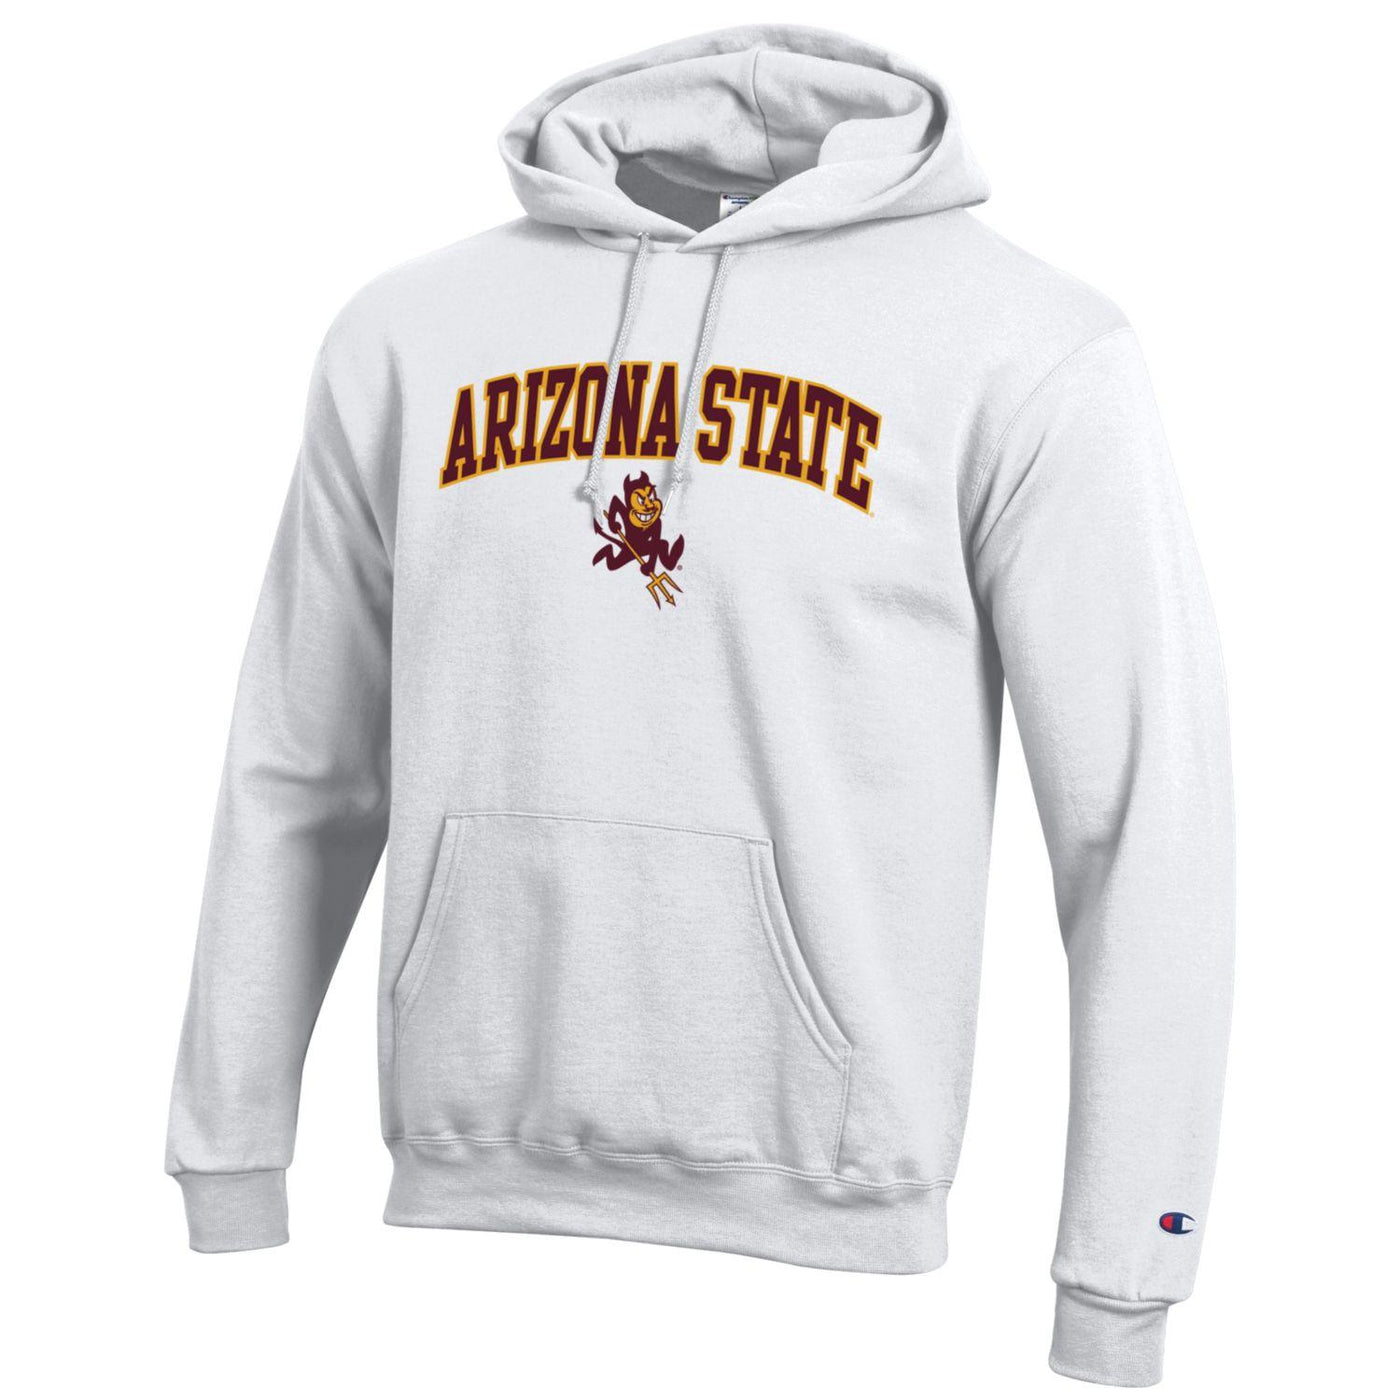 ASU white Champion hoody with single front pocket and 'Arizona State' arched over Sparky